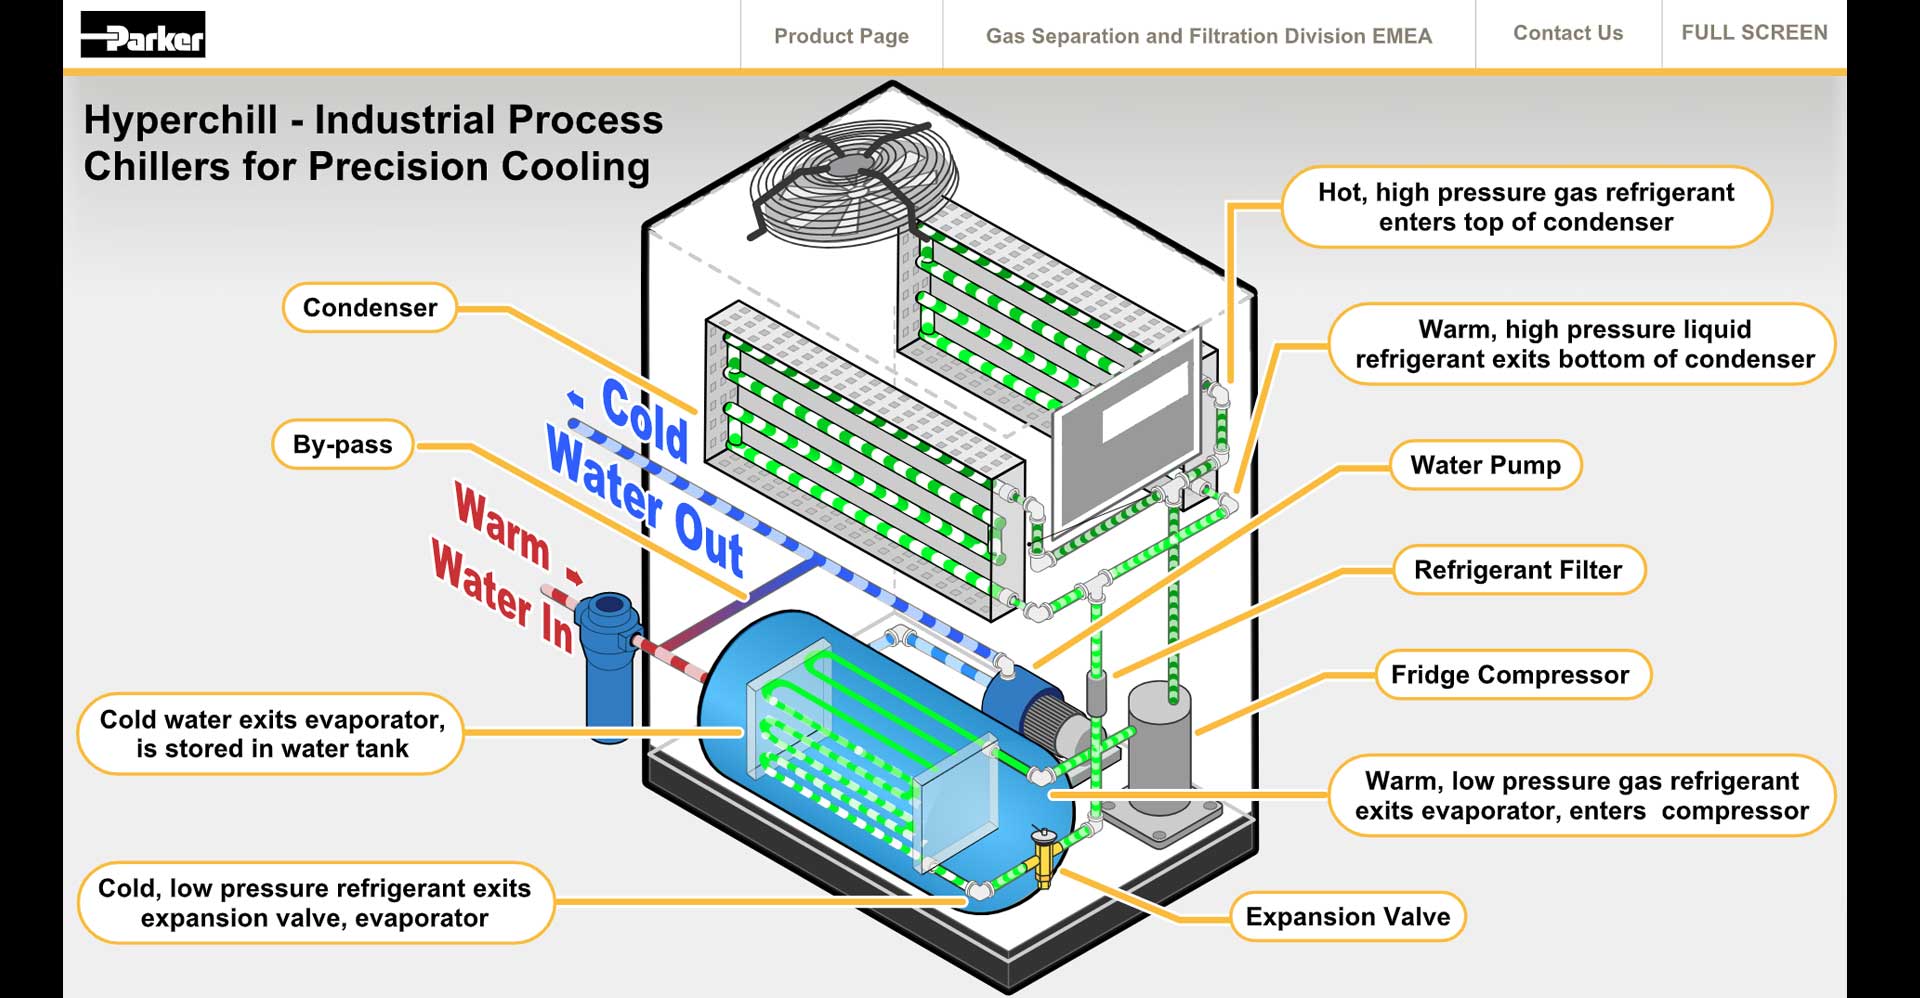 Hyperchill Industrial Process Chillers for Precision Cooling